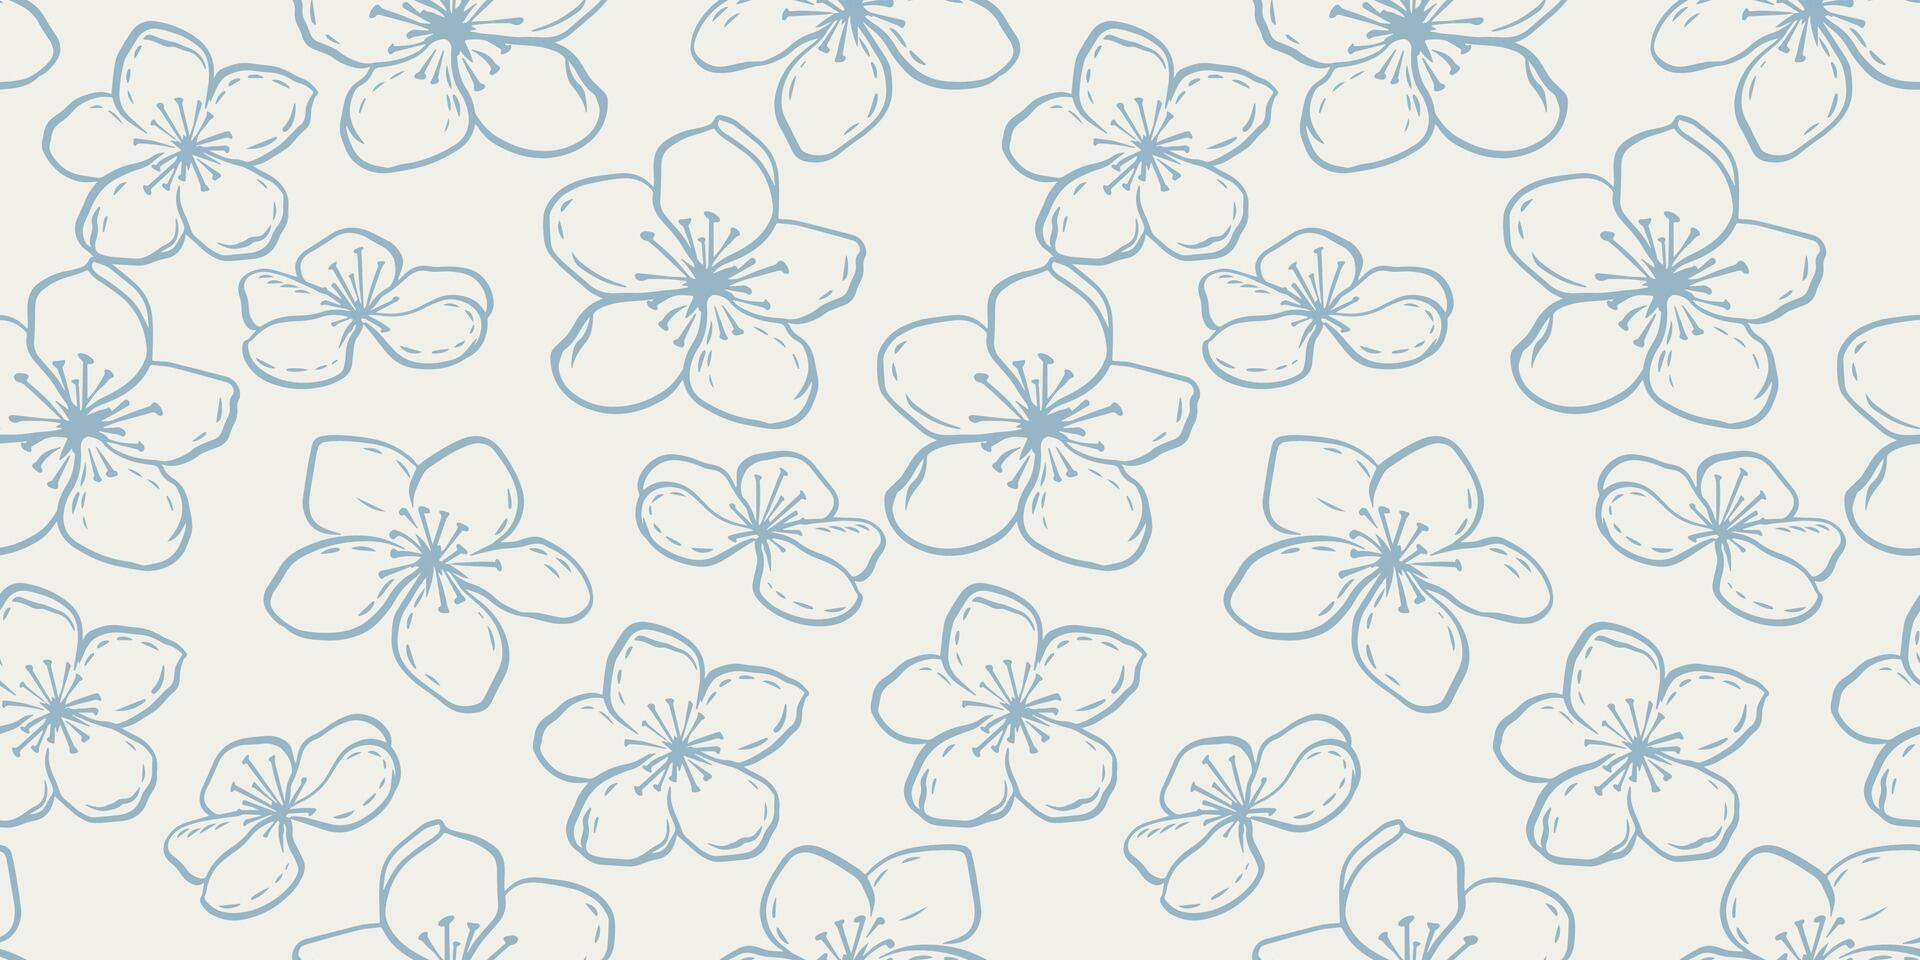 Pastel light seamless pattern with monotone art lines ditsy floral. Vector hand drawn sketch outlines of flowers, shapes. Template for designs, fabric, textiles, printing